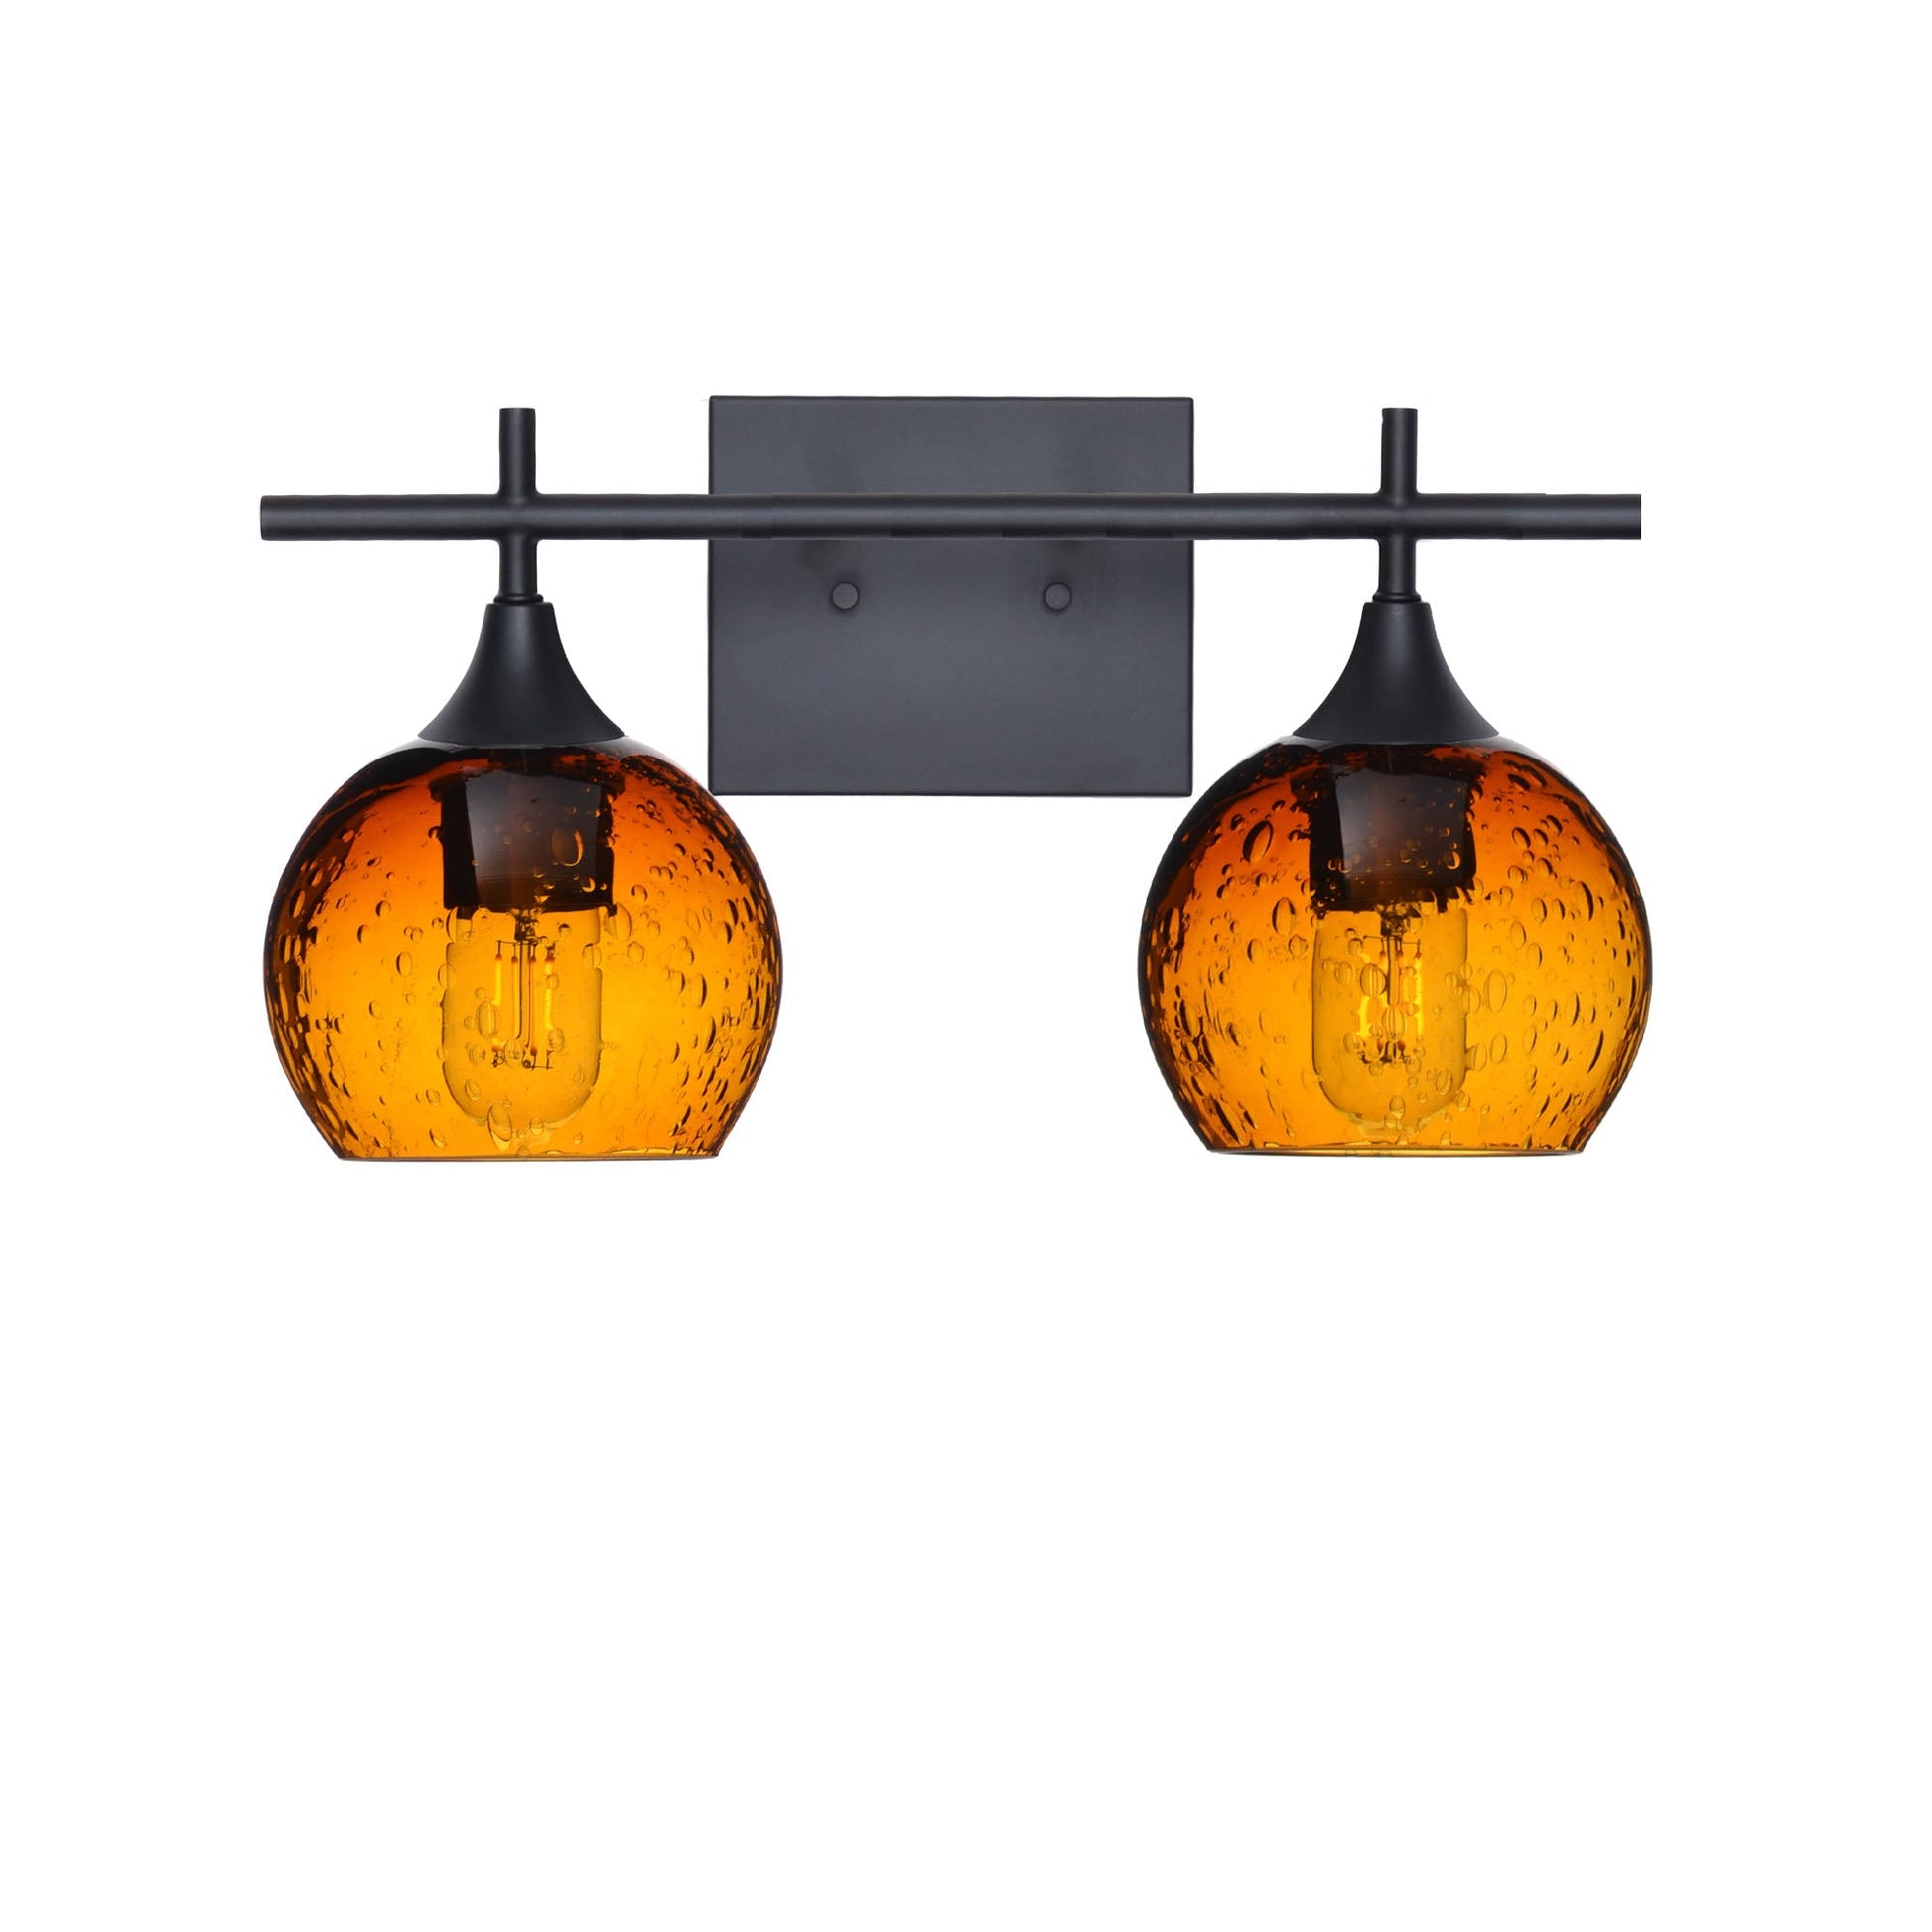 763 Lunar: 2 Light Wall Vanity-Glass-Bicycle Glass Co - Hotshop-Golden Amber-Matte Black-Bicycle Glass Co